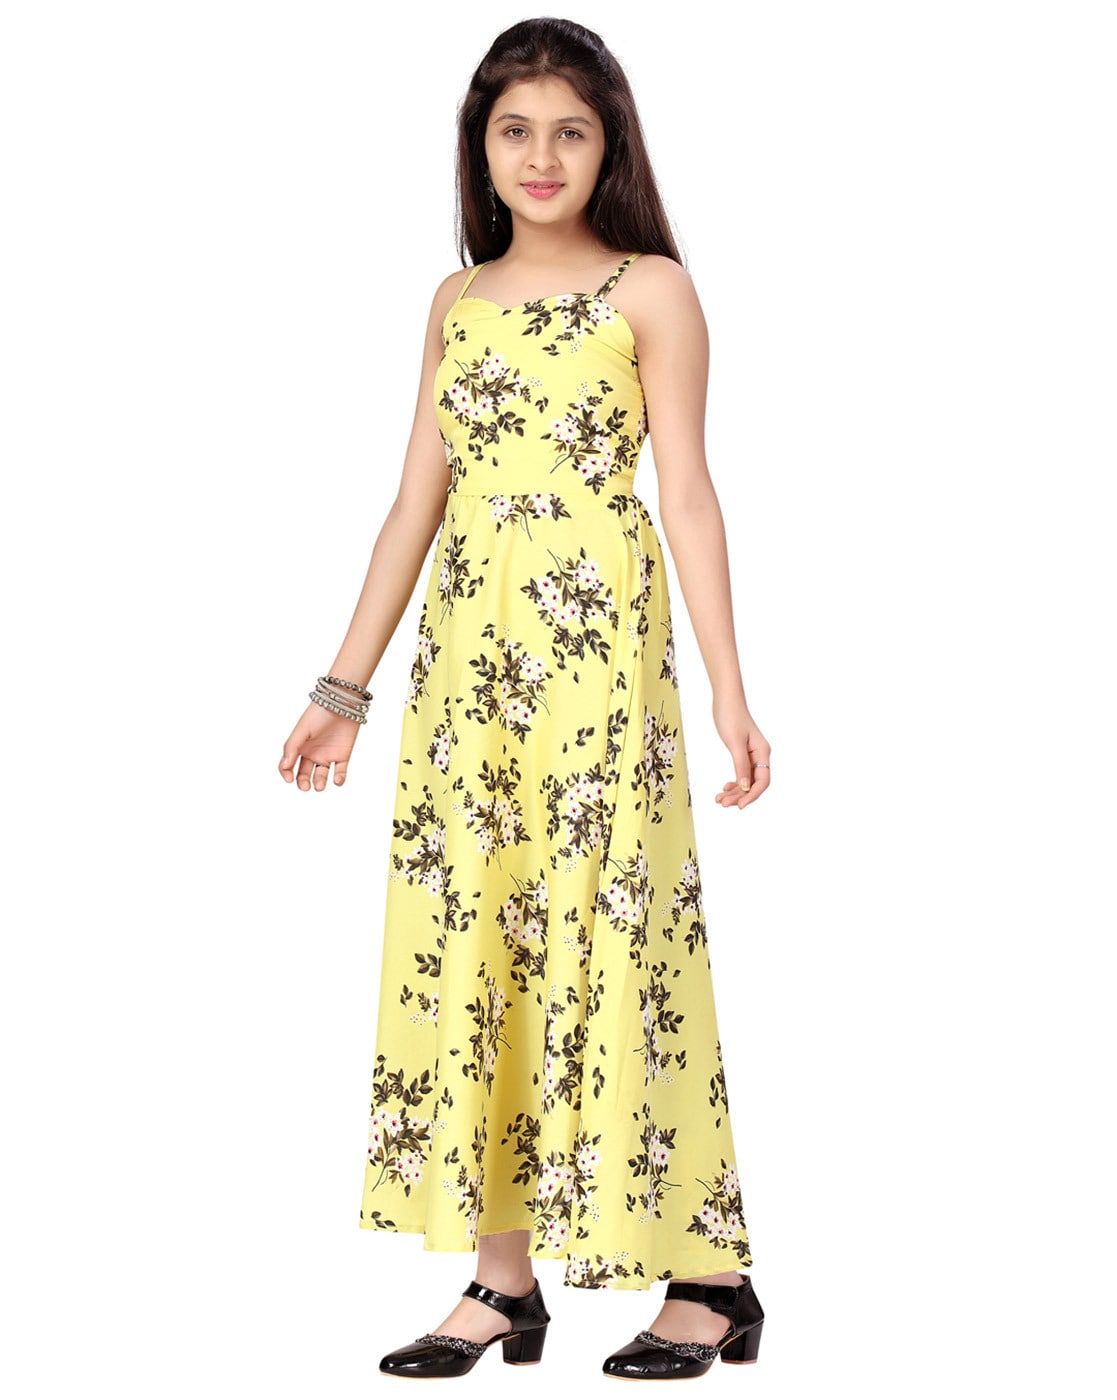 Dresses | EE-Yellow One Piece Dress For Women | Freeup